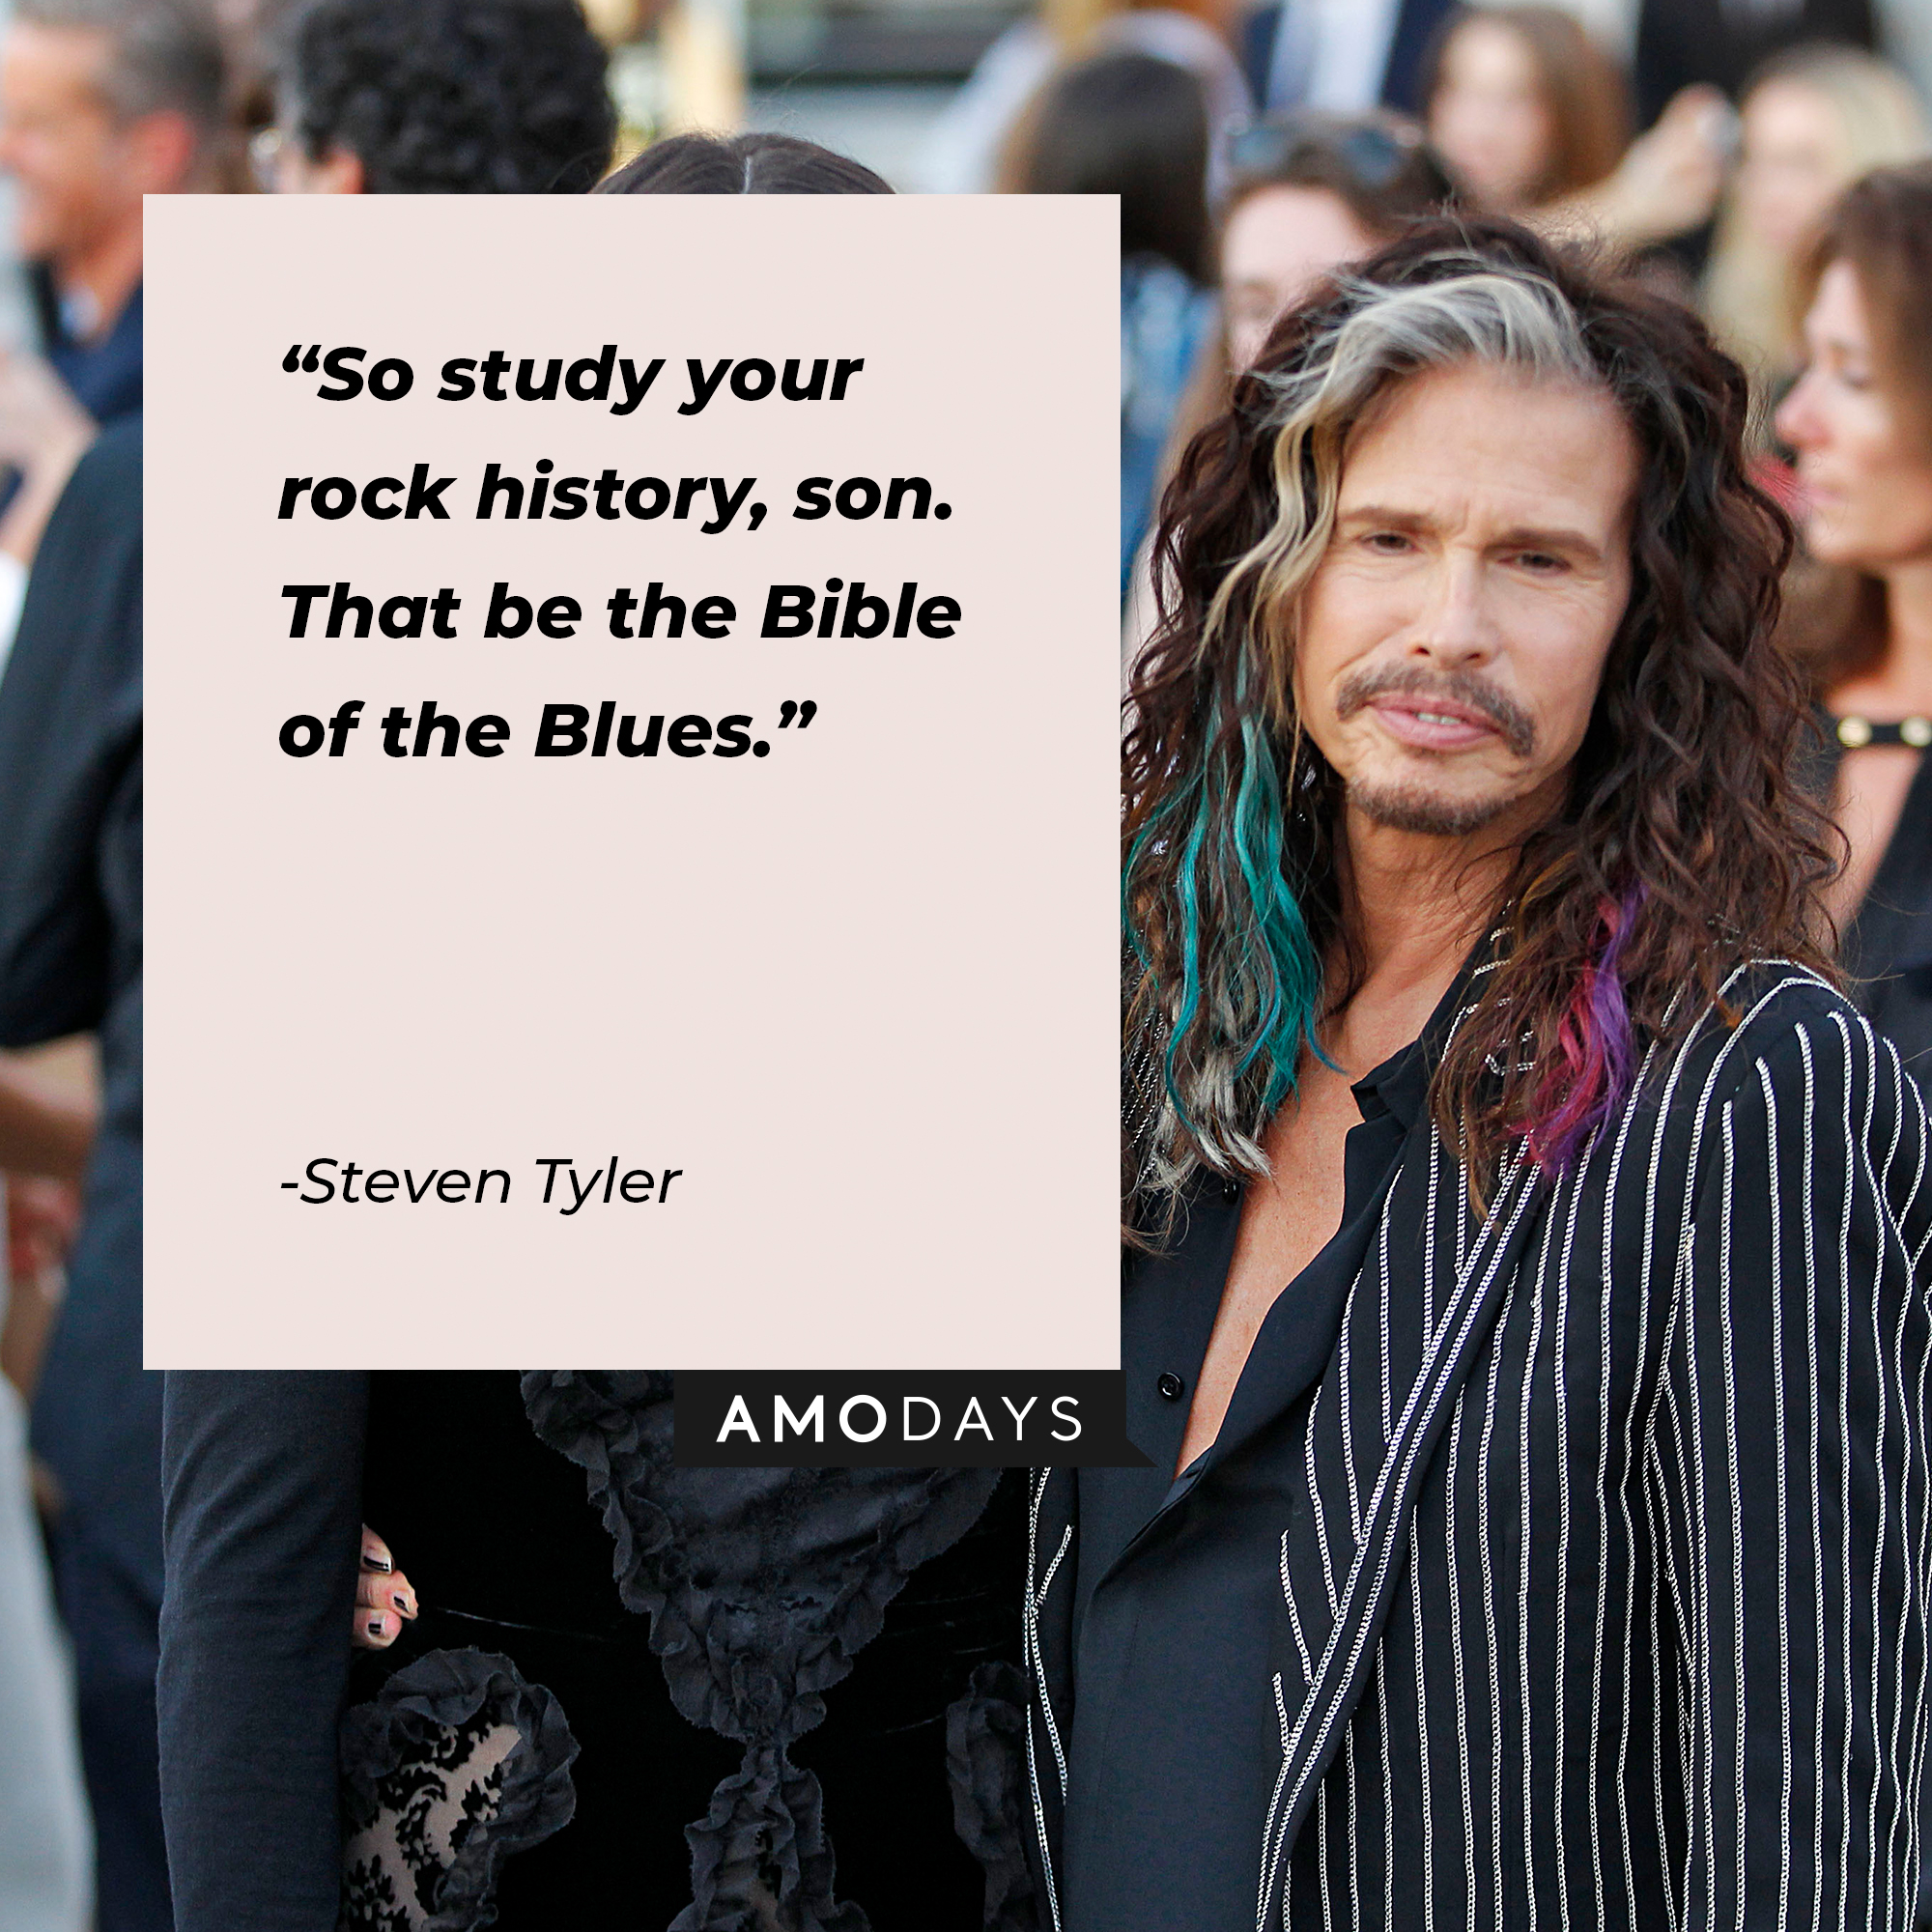 Steven Tyler's quote: "So study your rock history, son. That be the Bible of the Blues." | Source: Getty Images